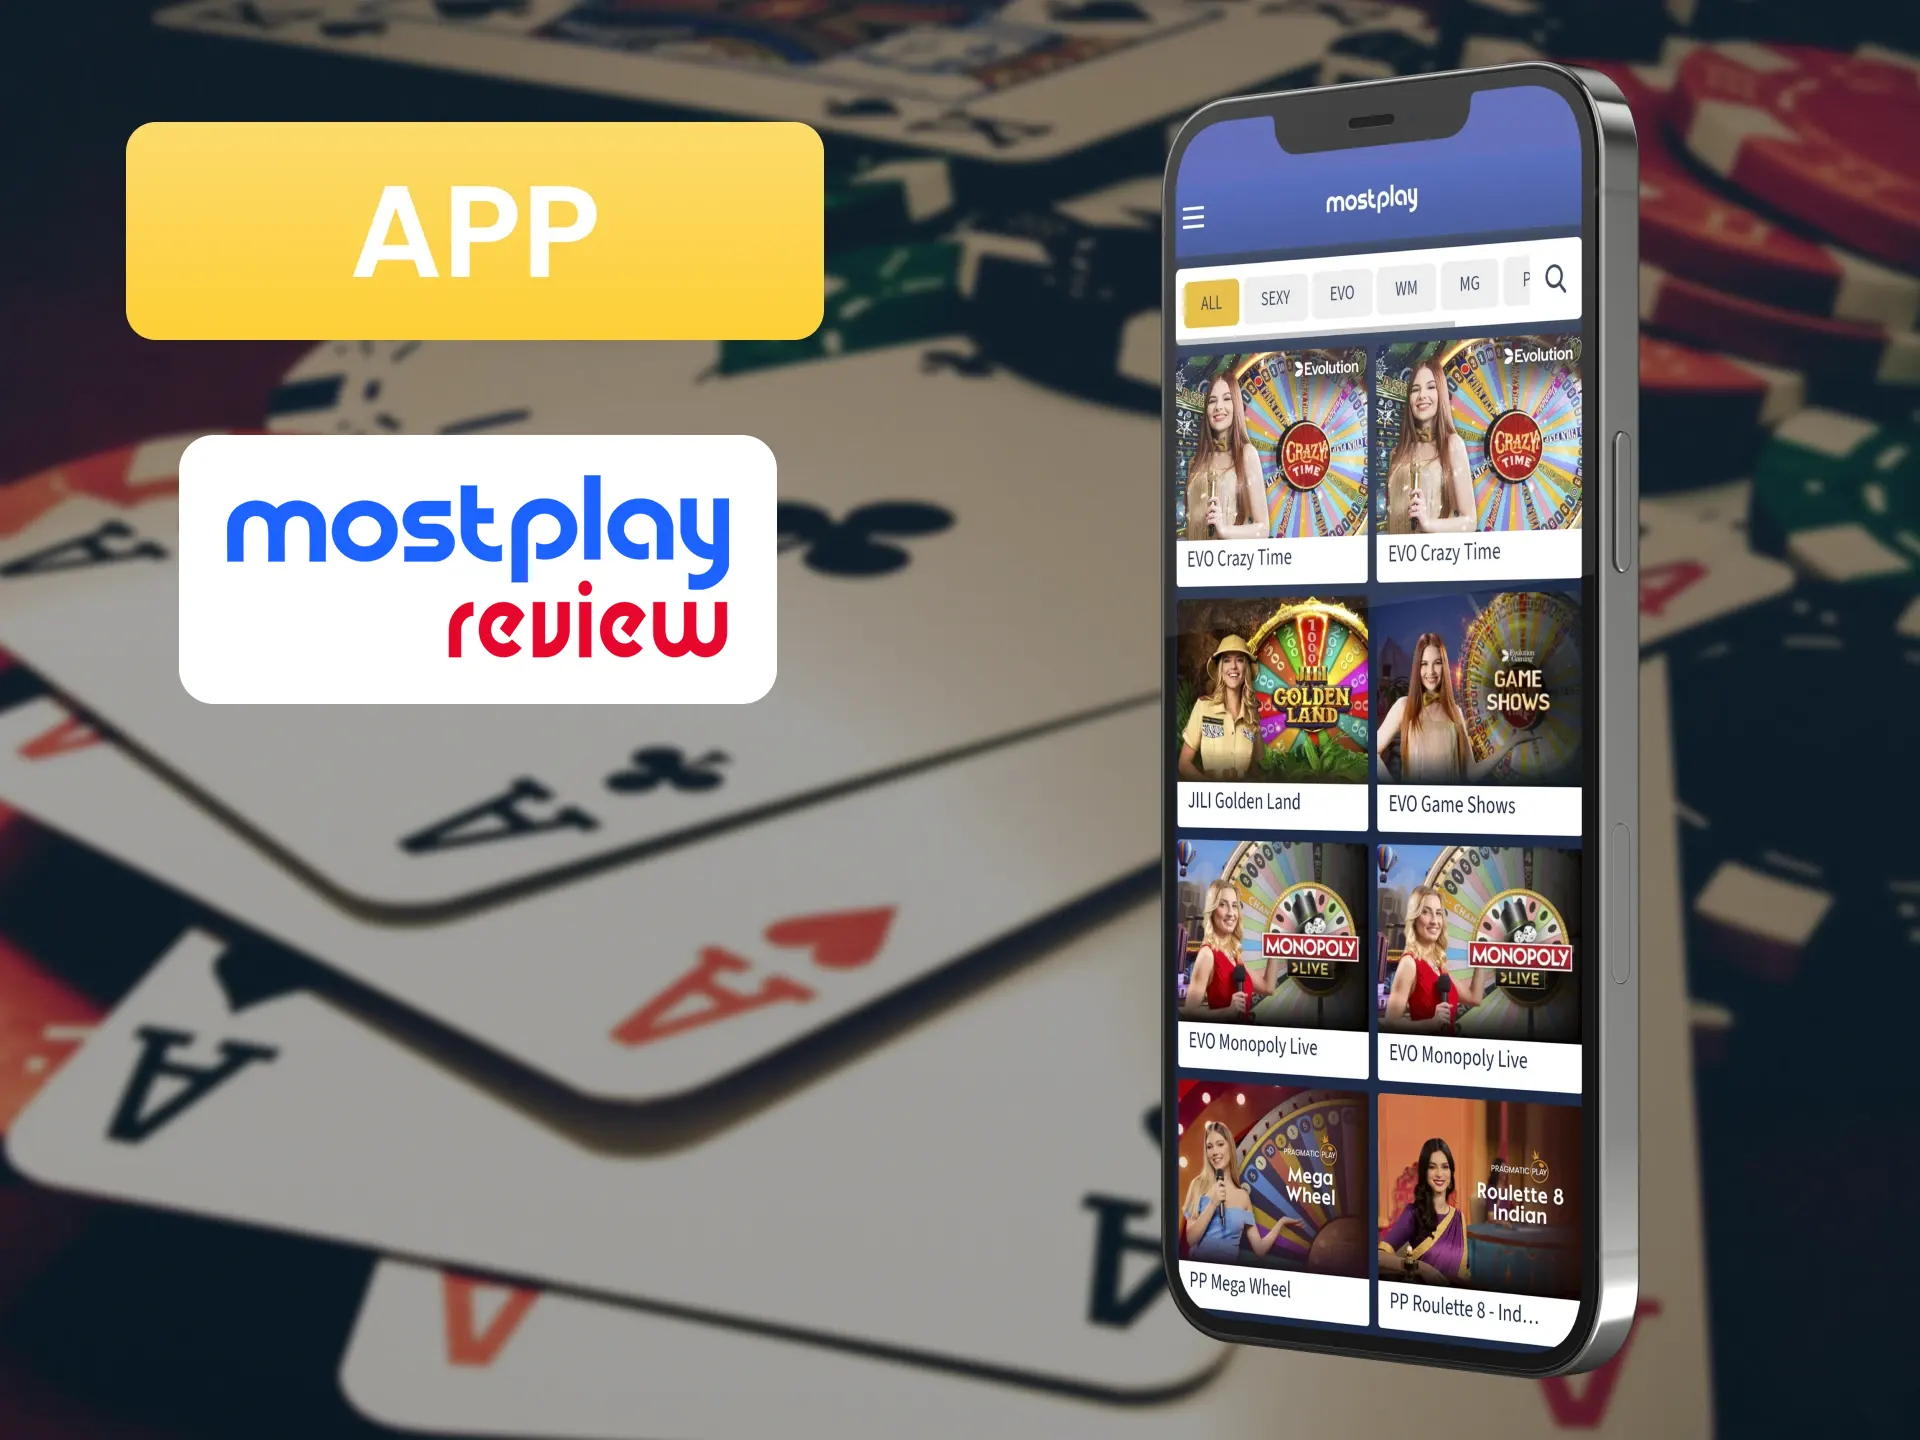 You can play at Live Casino through the Mostplay application.